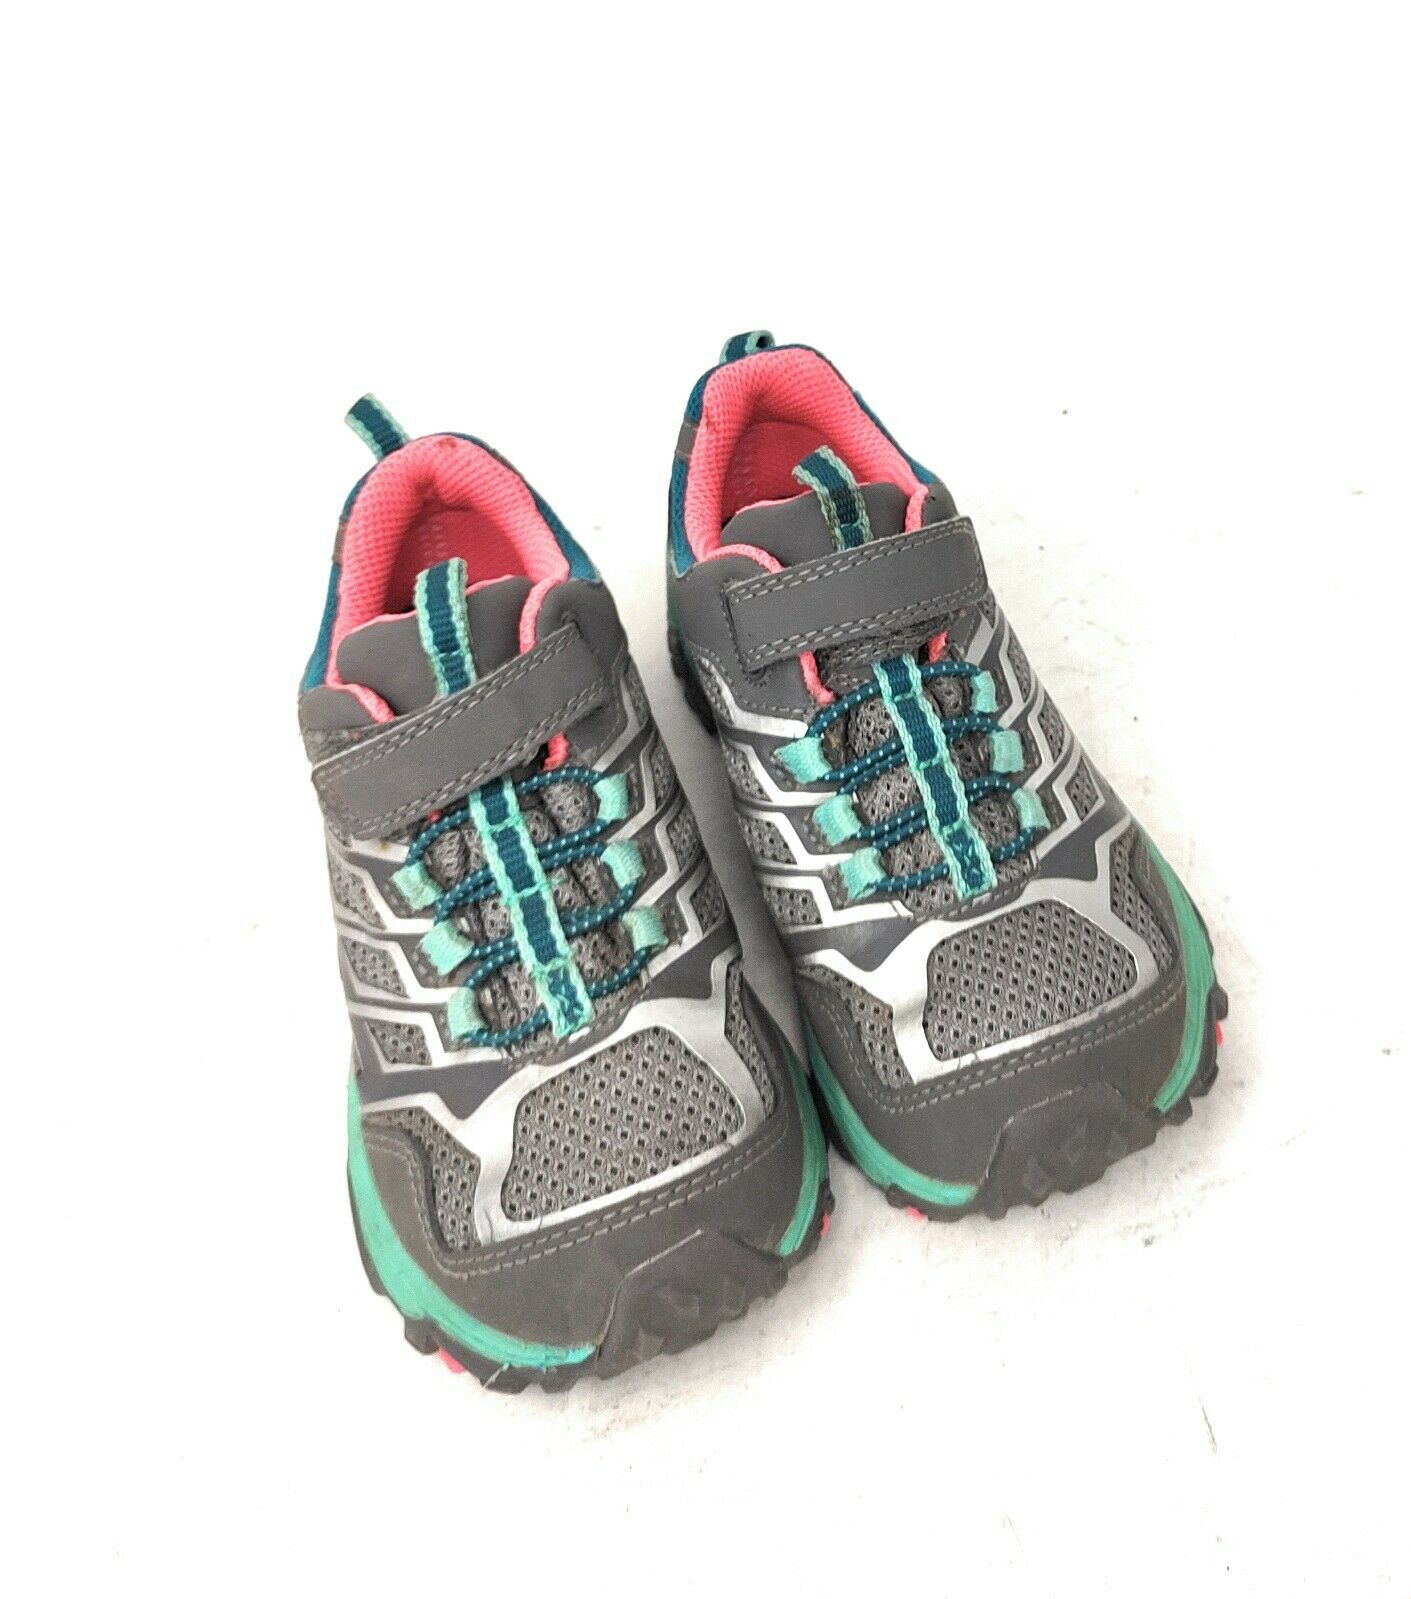 Merrell Select ML-G MOAB LOW Waterproof Grey Teal Pink Shoes Girls Size 13M